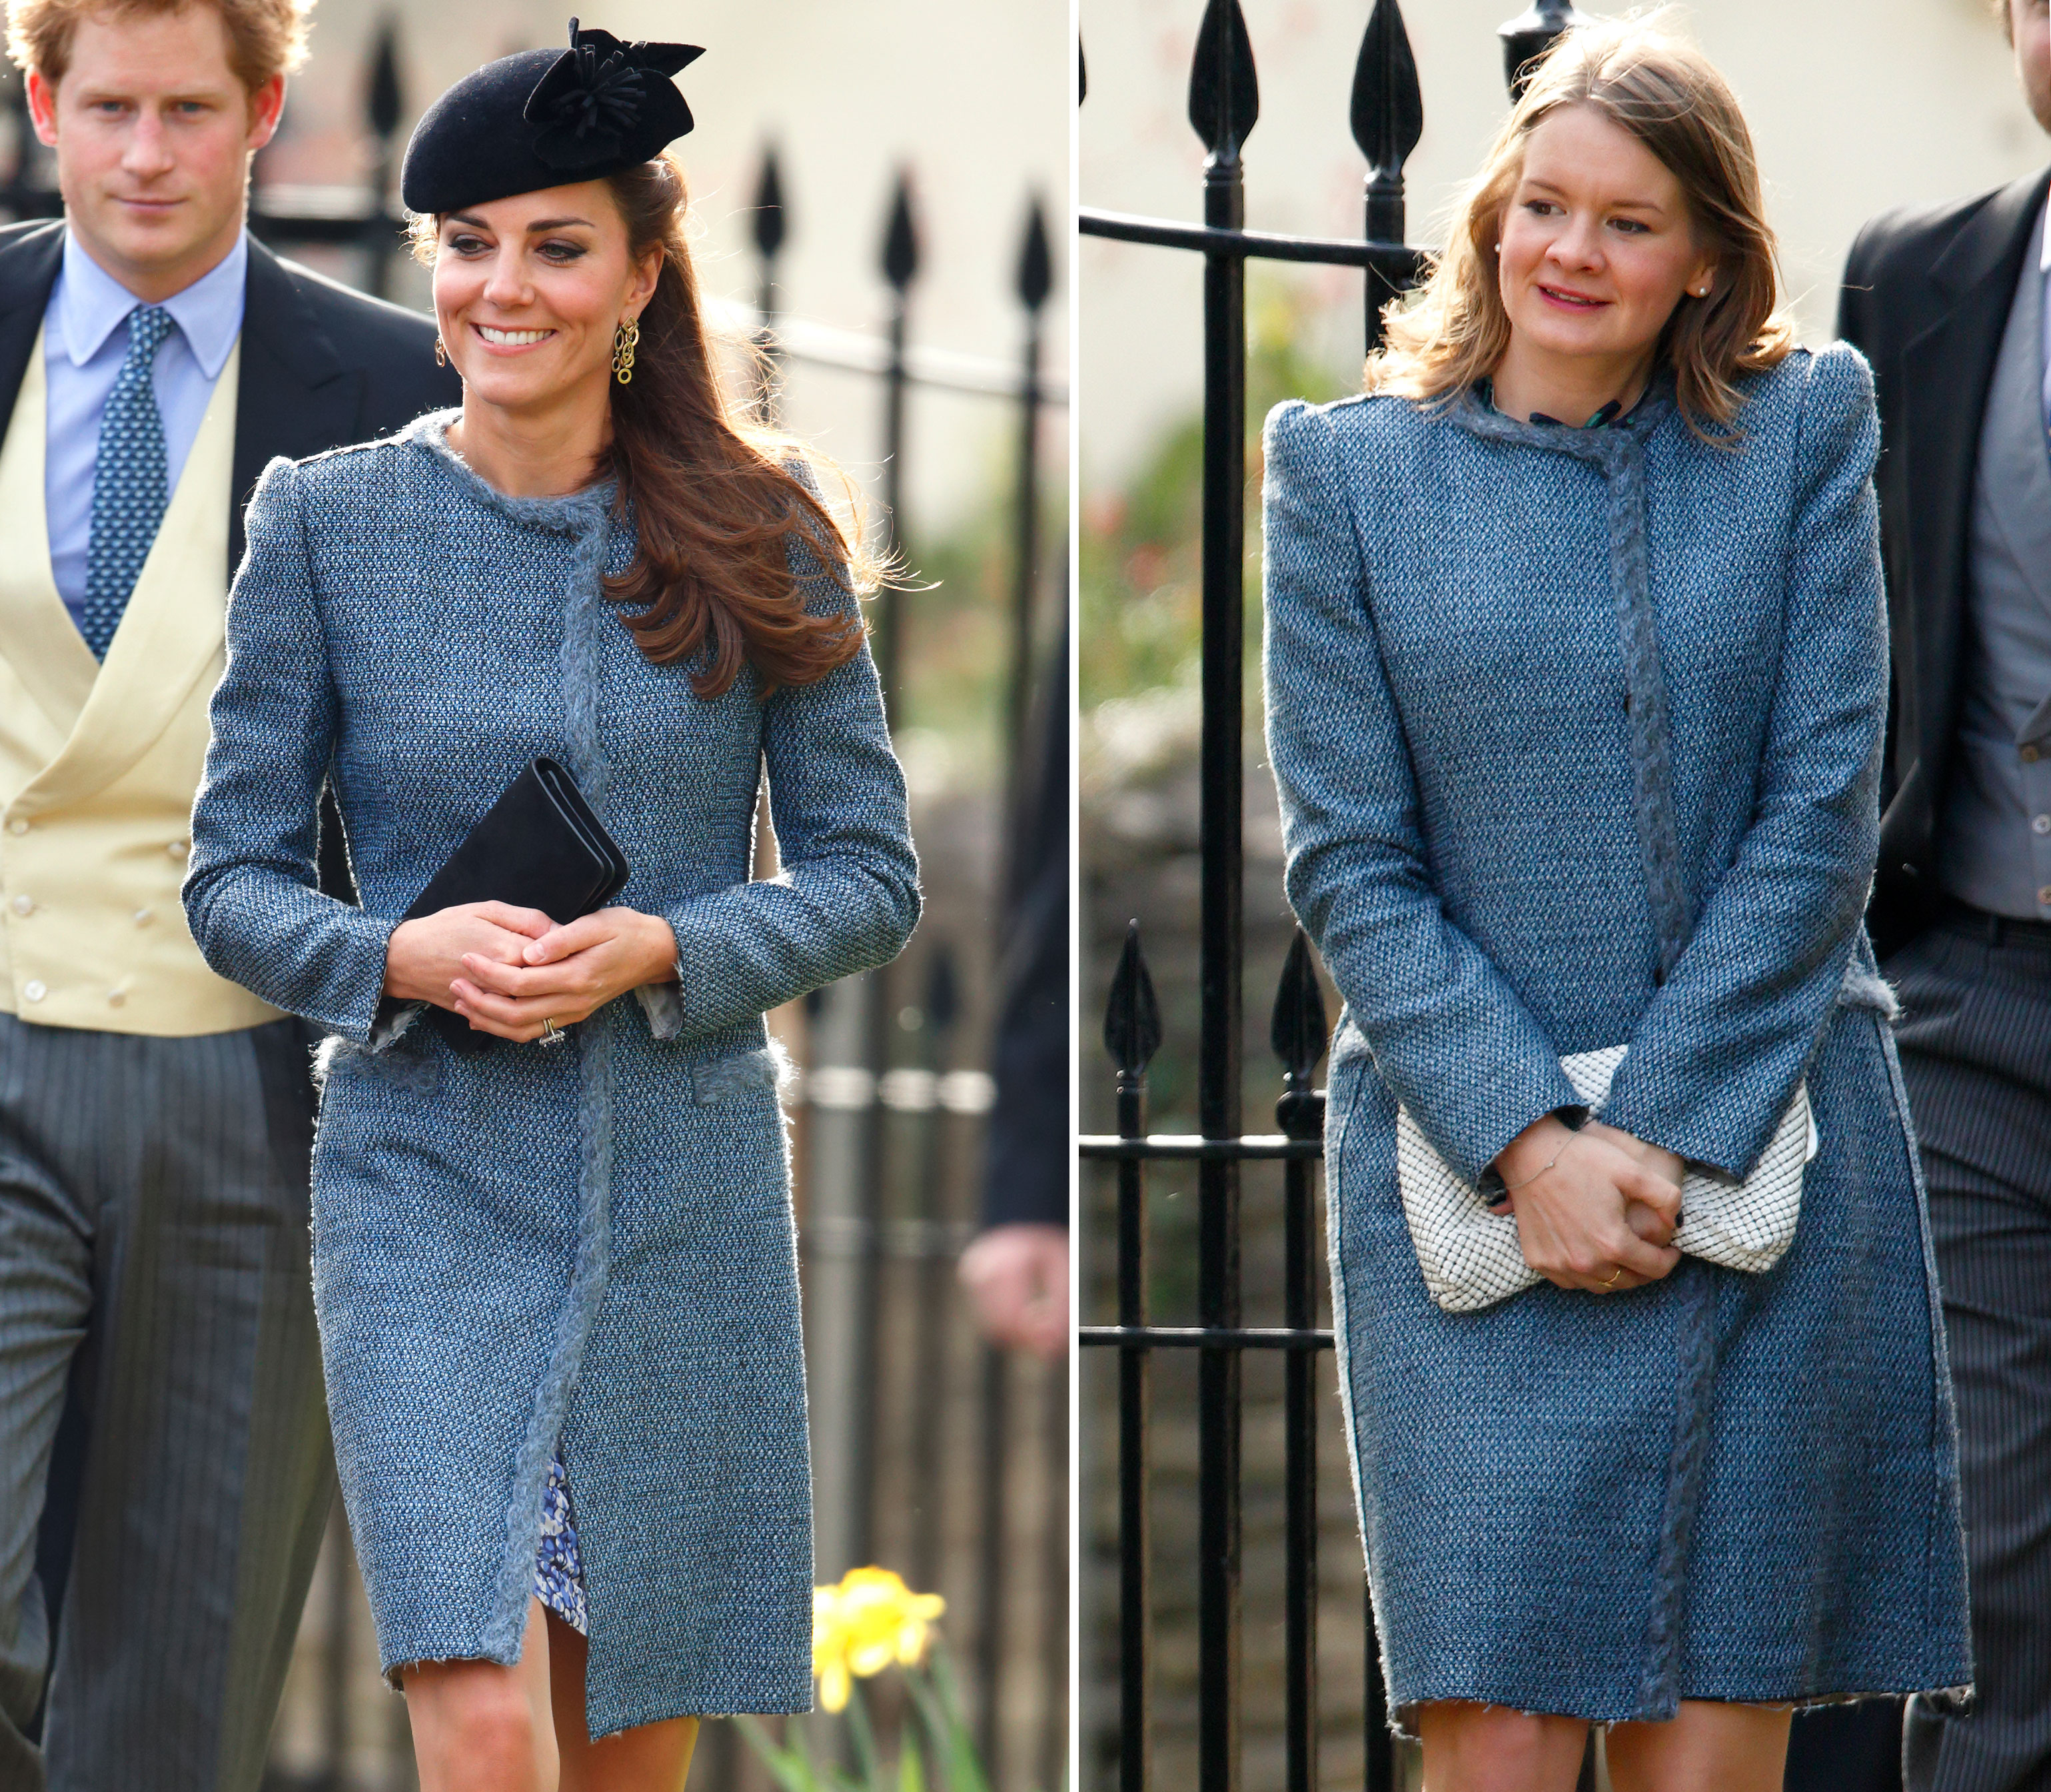 From left: Catherine, Duchess of Cambridge and a fellow guest wearing the same Missoni coat attend the wedding of Lucy Meade and Charlie Budgett at the church of St Mary the Virgin, Marshfield on March 29, 2014 in Chippenham, England. (Max Mumby—Indigo/Getty Images)